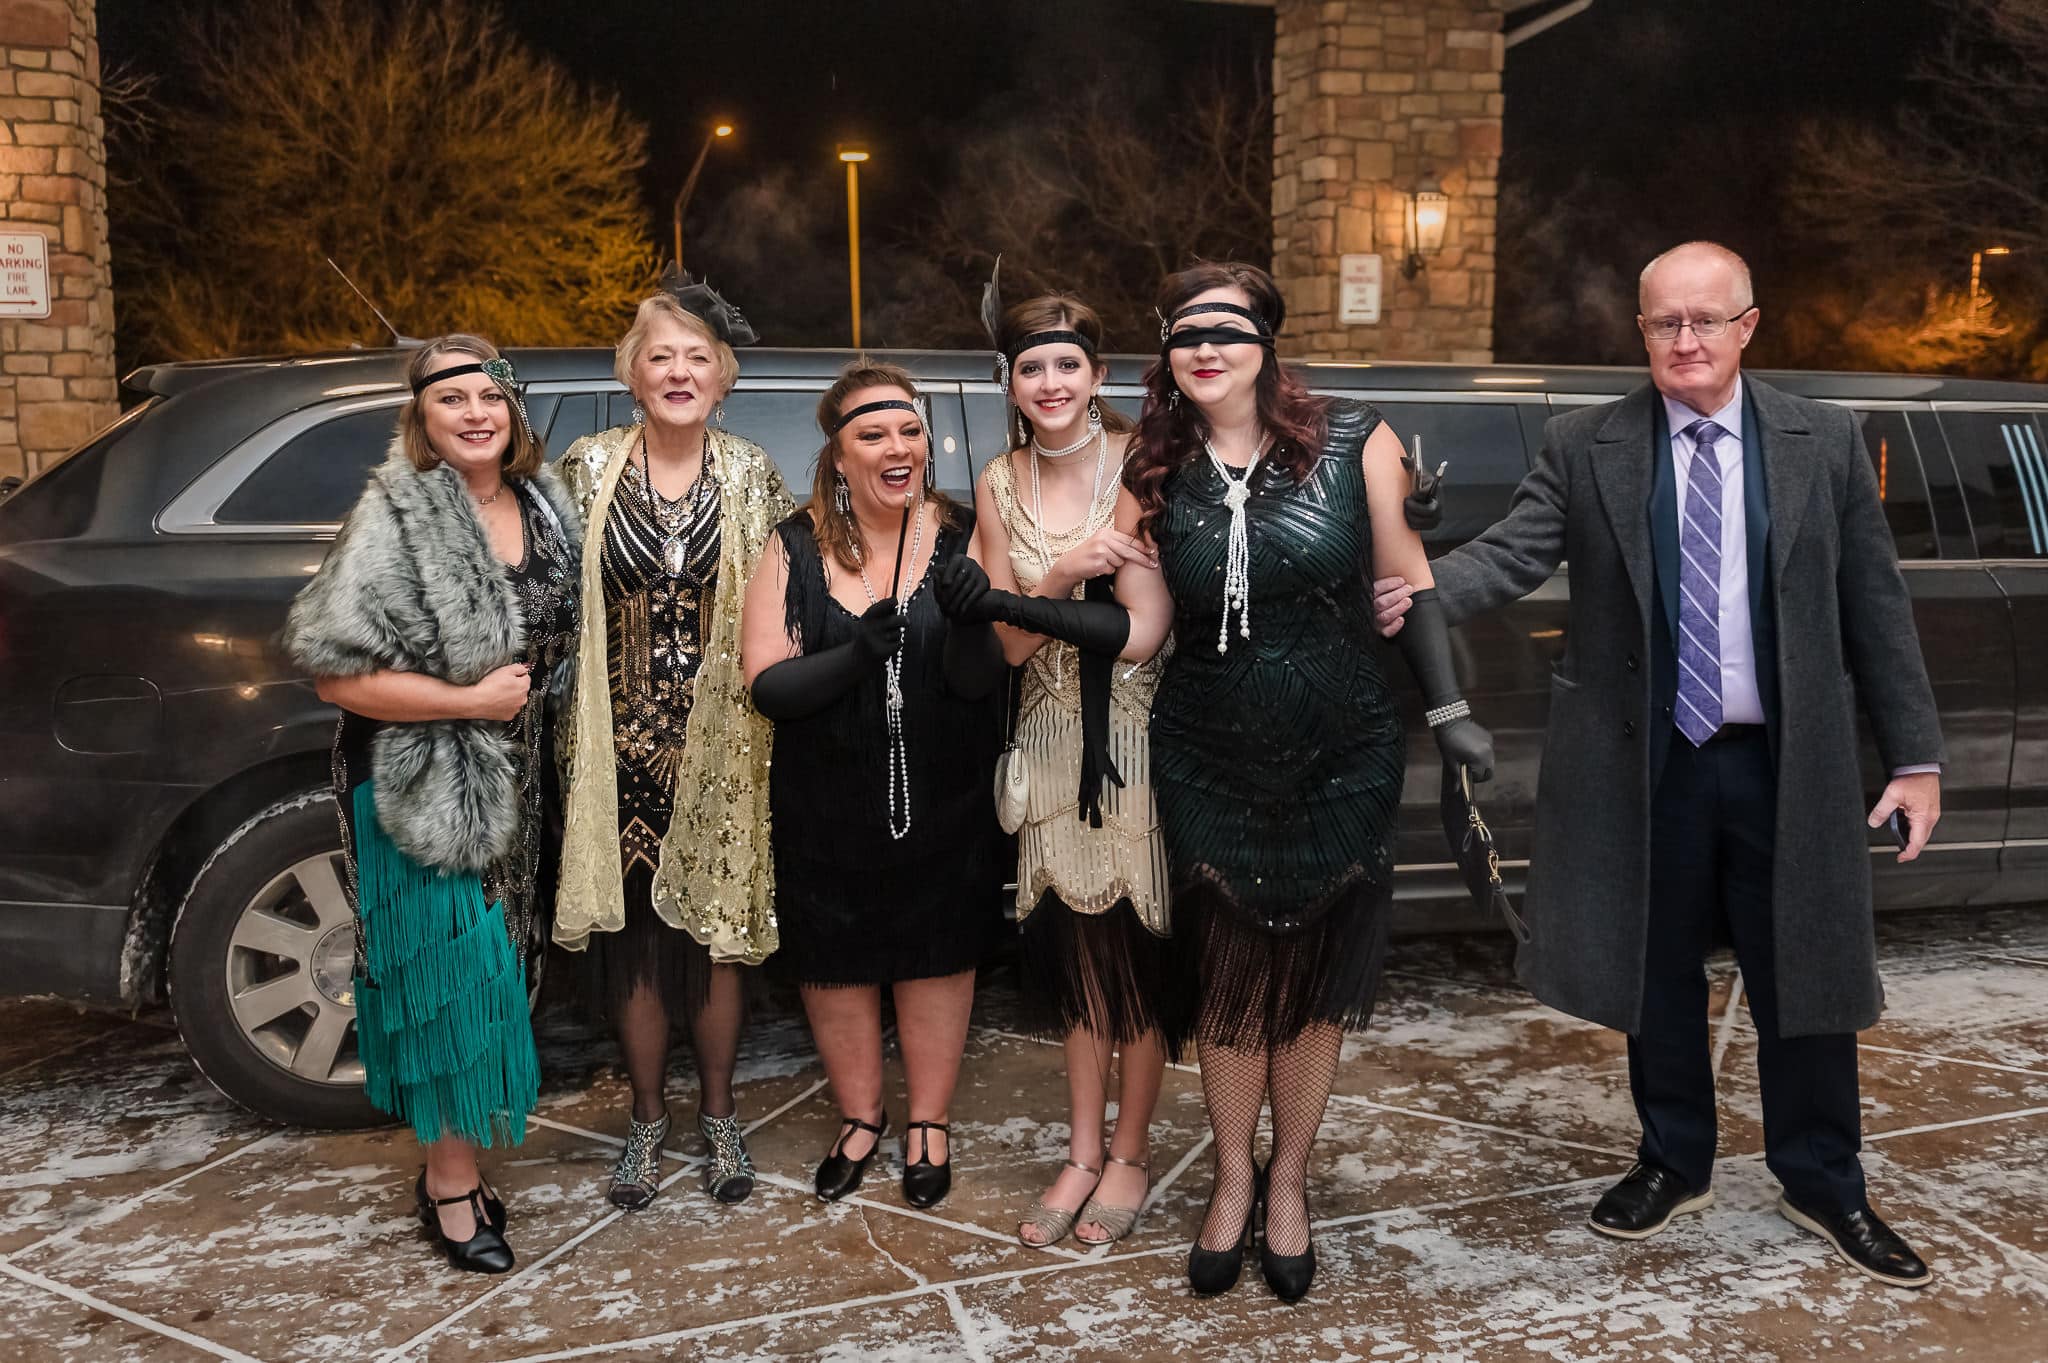 Guests dressed in 1920s attire for a Great Gatsby party arrive via a limousine. 